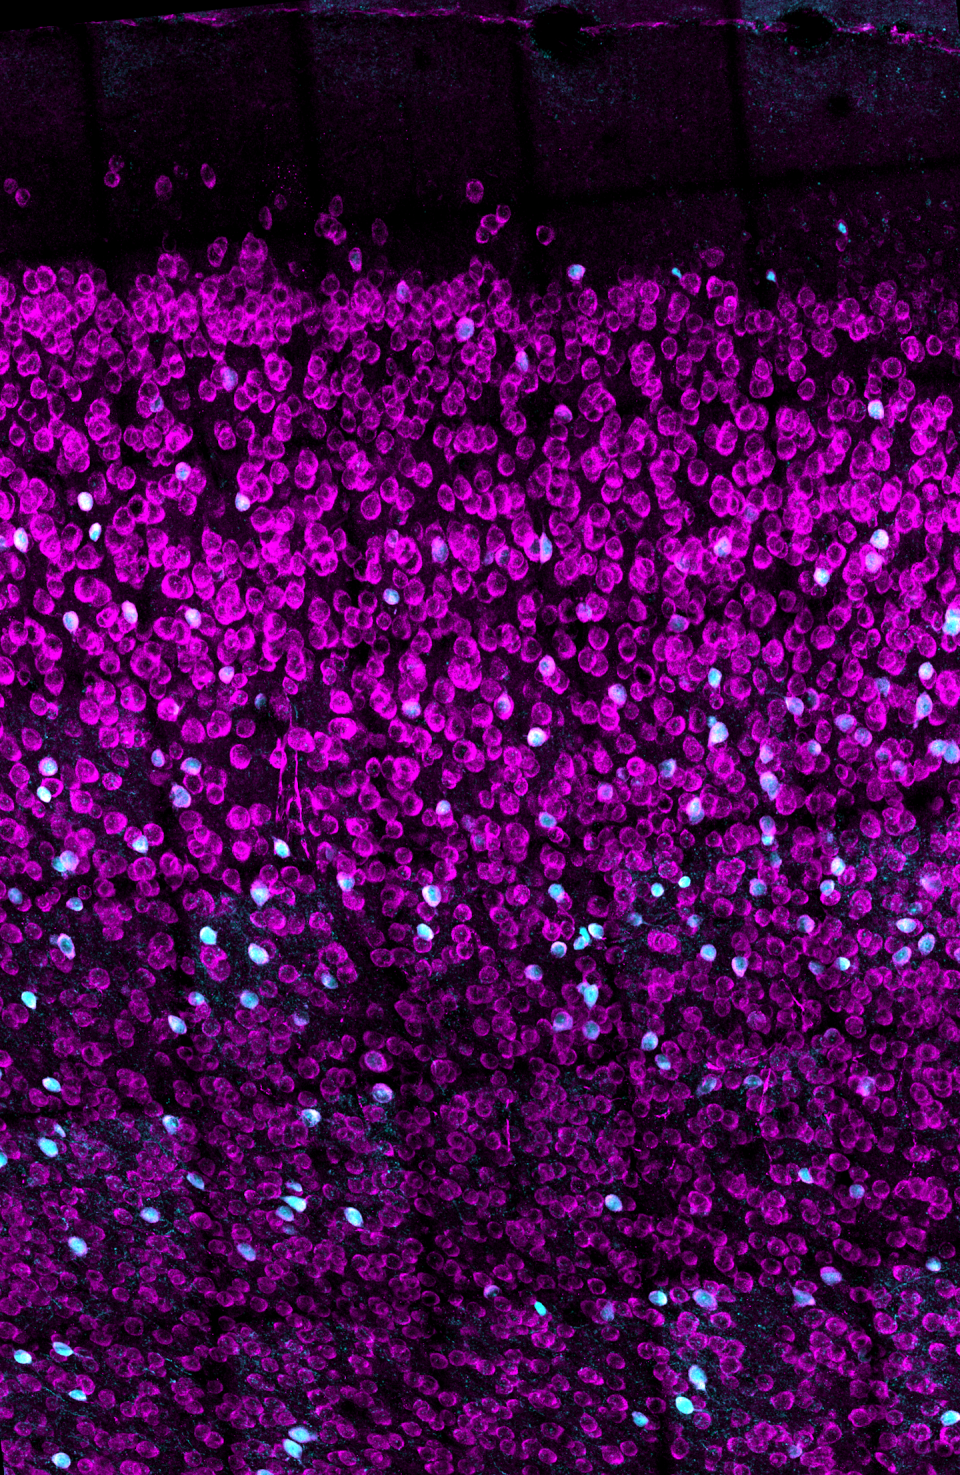 Image of hormone receptors in the prefrontal cortex of the brain, lit up in different colors.